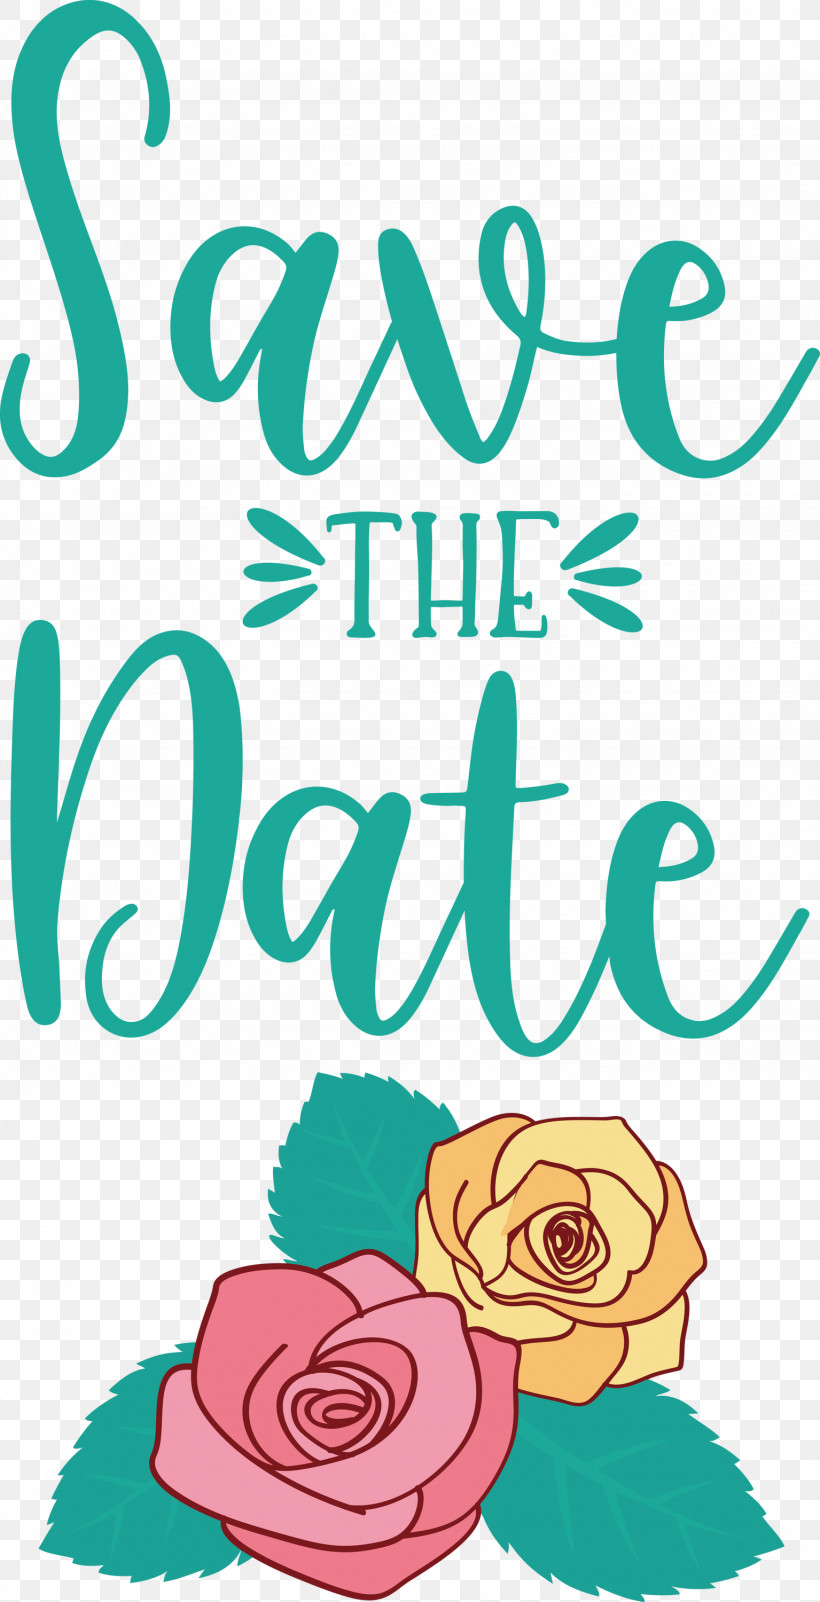 Save The Date Wedding, PNG, 1535x3000px, Save The Date, Browser Extension, Floral Design, Invitations Cards, Wedding Download Free